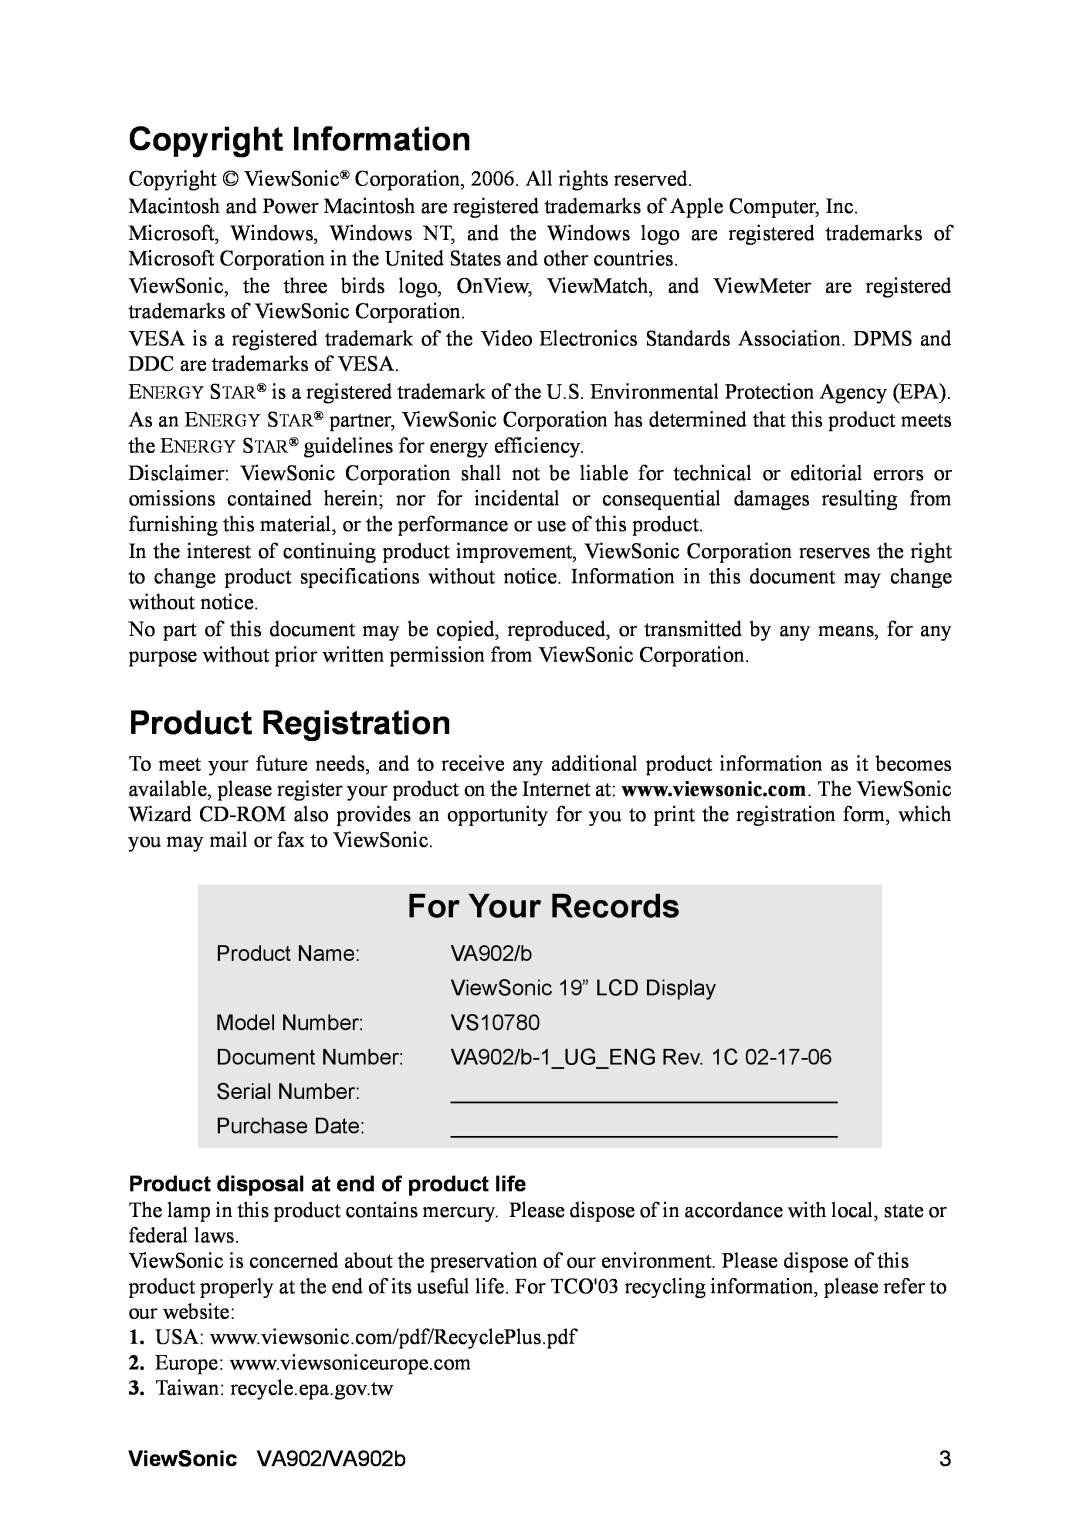 ViewSonic VA902 Copyright Information, Product Registration, For Your Records, Product disposal at end of product life 